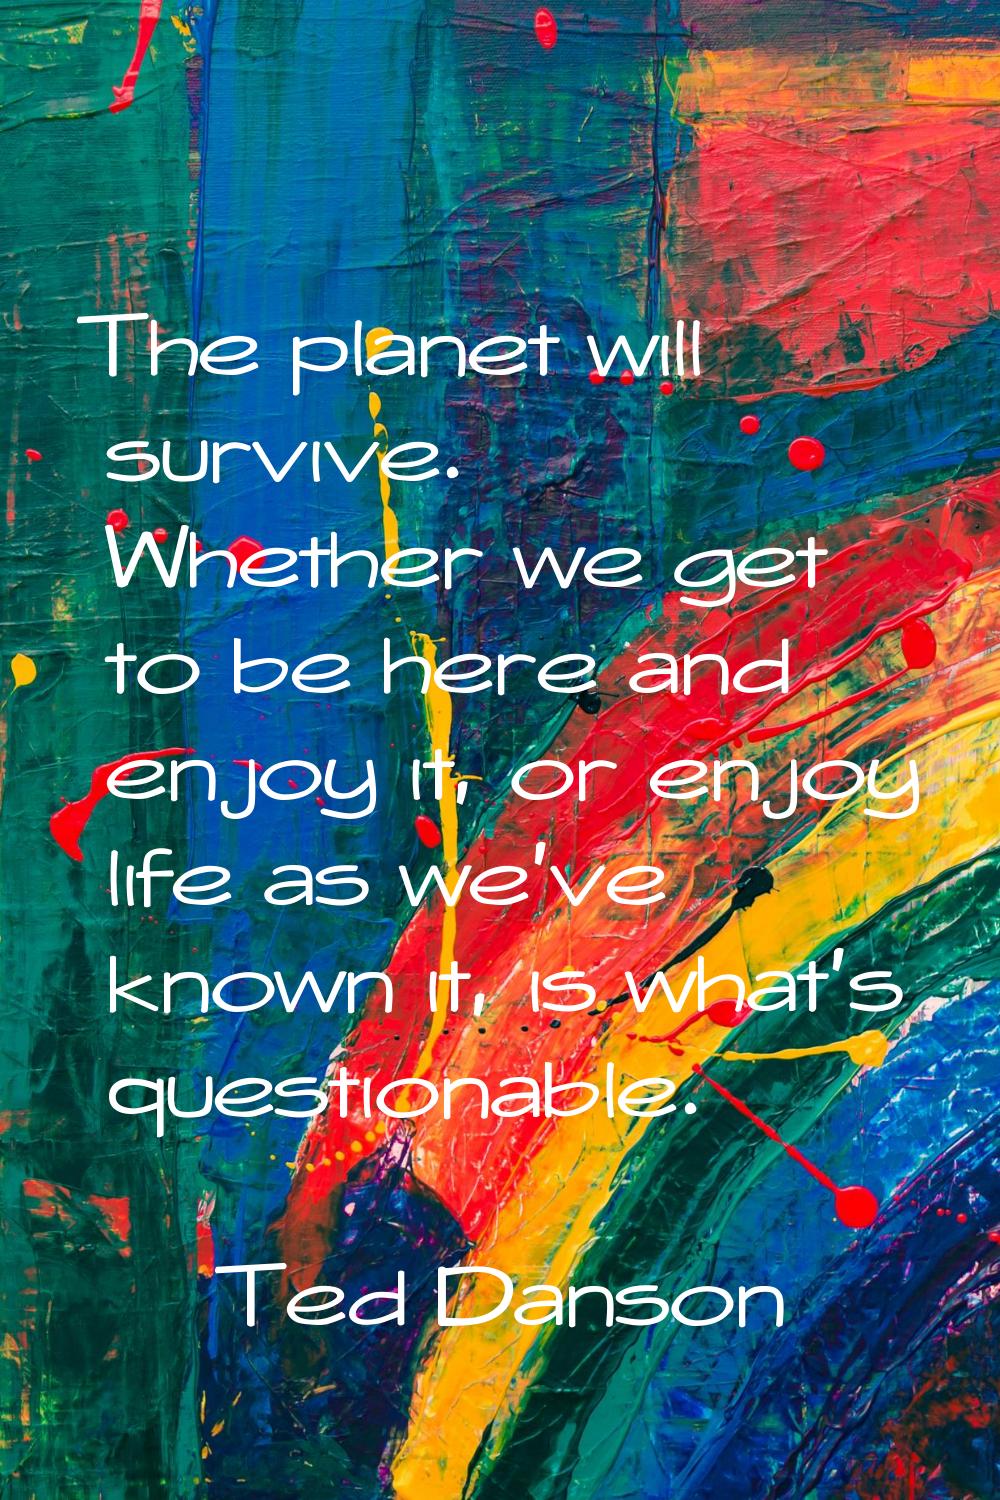 The planet will survive. Whether we get to be here and enjoy it, or enjoy life as we've known it, i